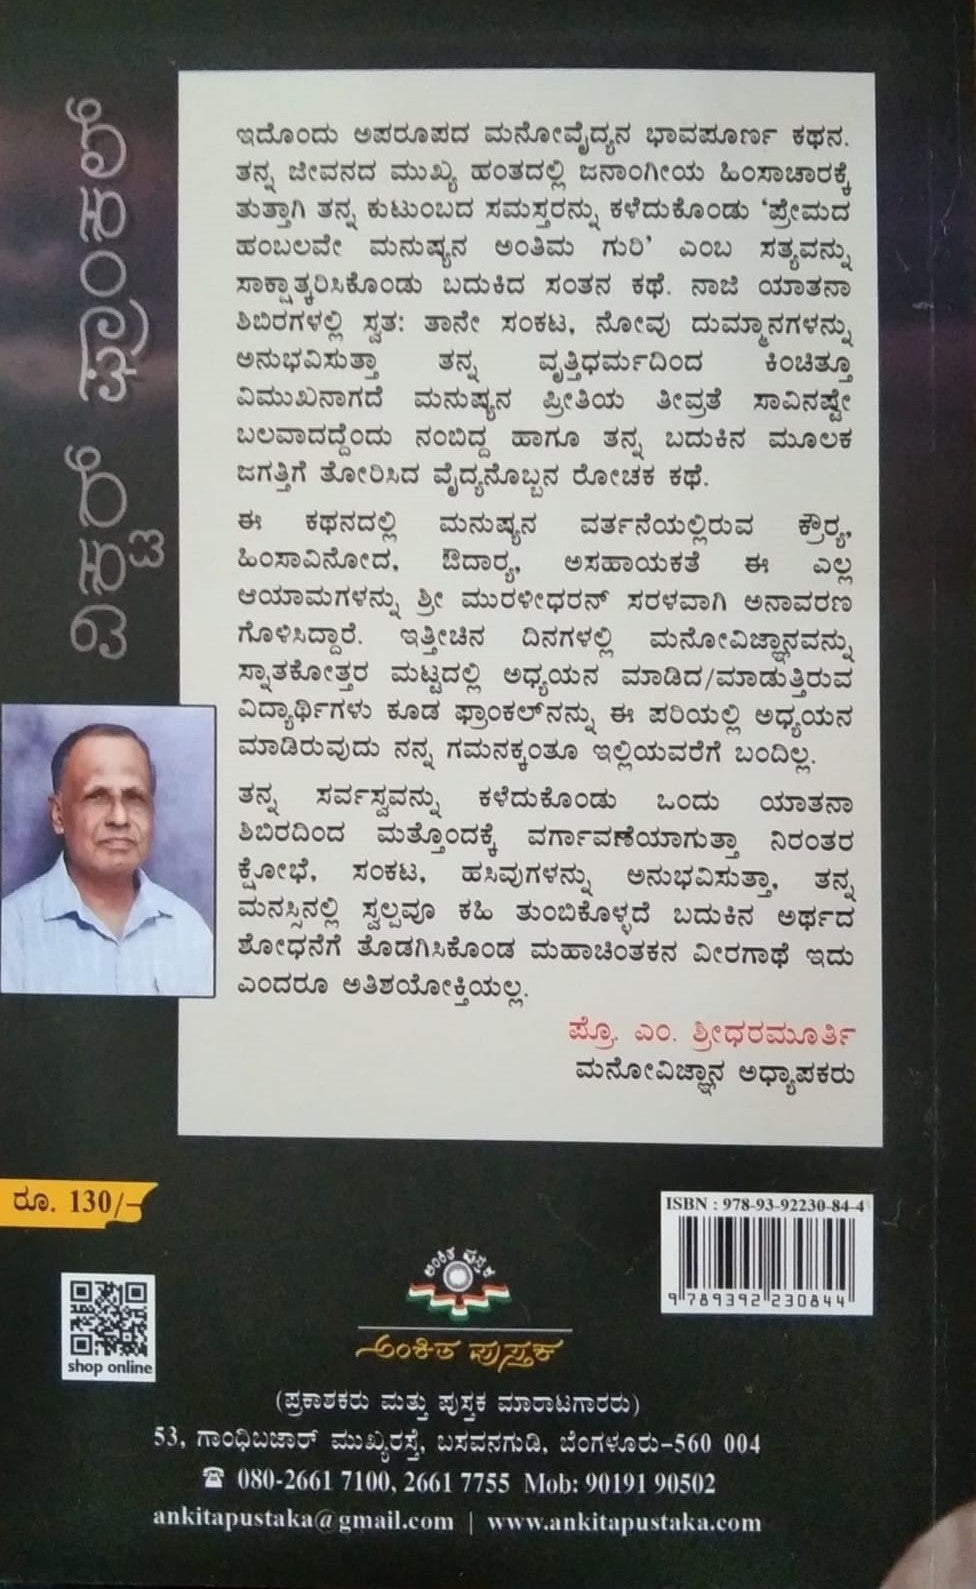 A Biography Book of a Psychiatrist Victor Frankal Written by Y. G. Muralidharan and Published by Ankita Pustaka , Book Title : Victor Frankal